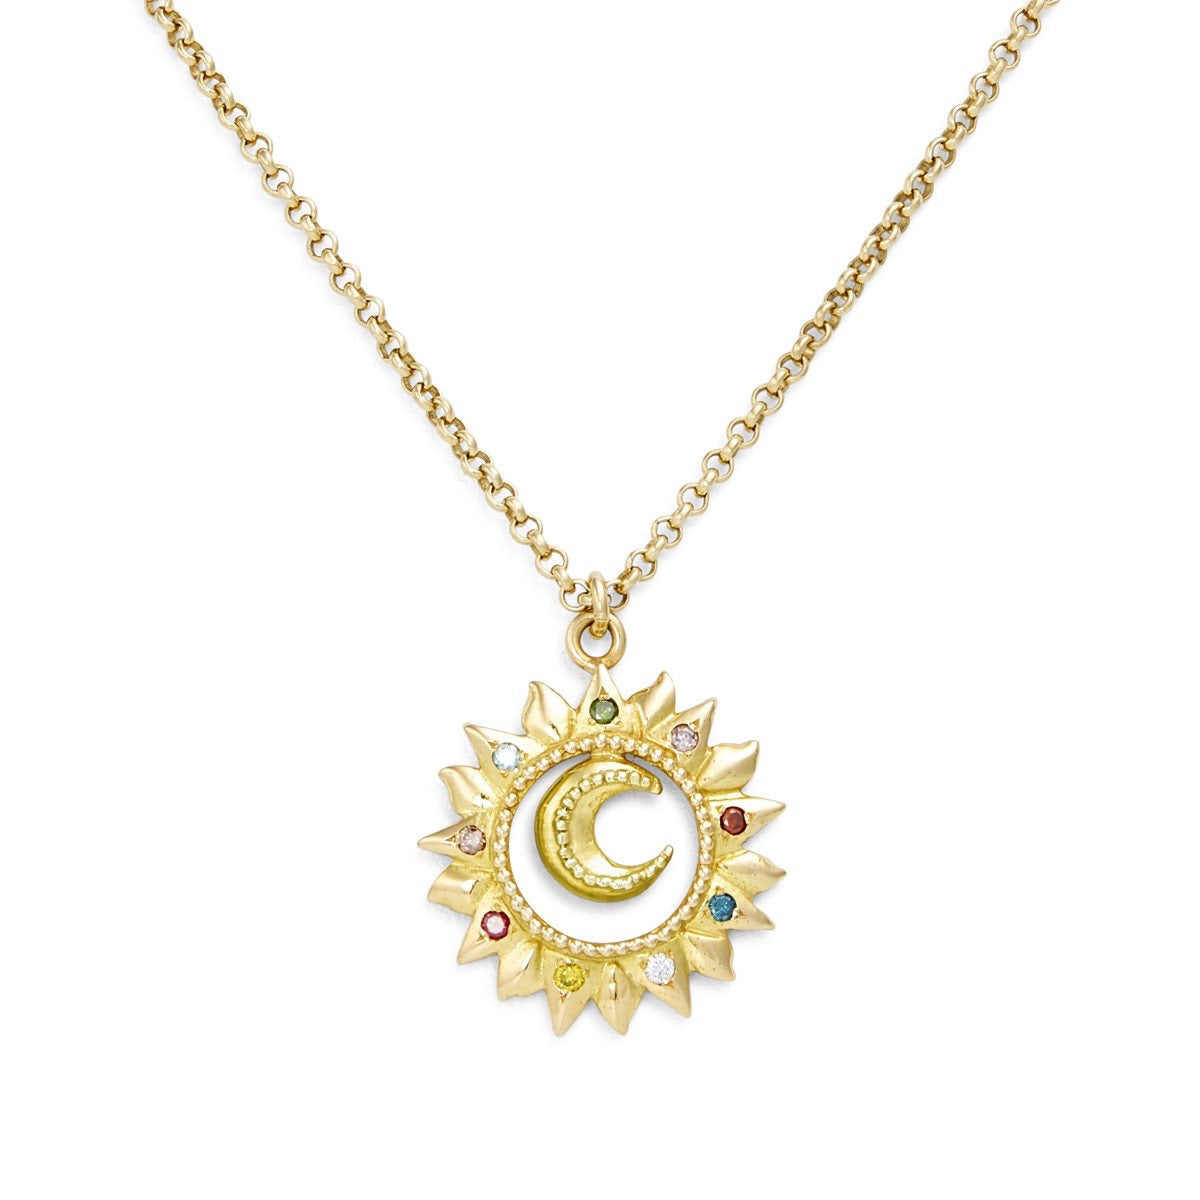 Eclisse Gold & Diamond Necklace by Sophie Harley